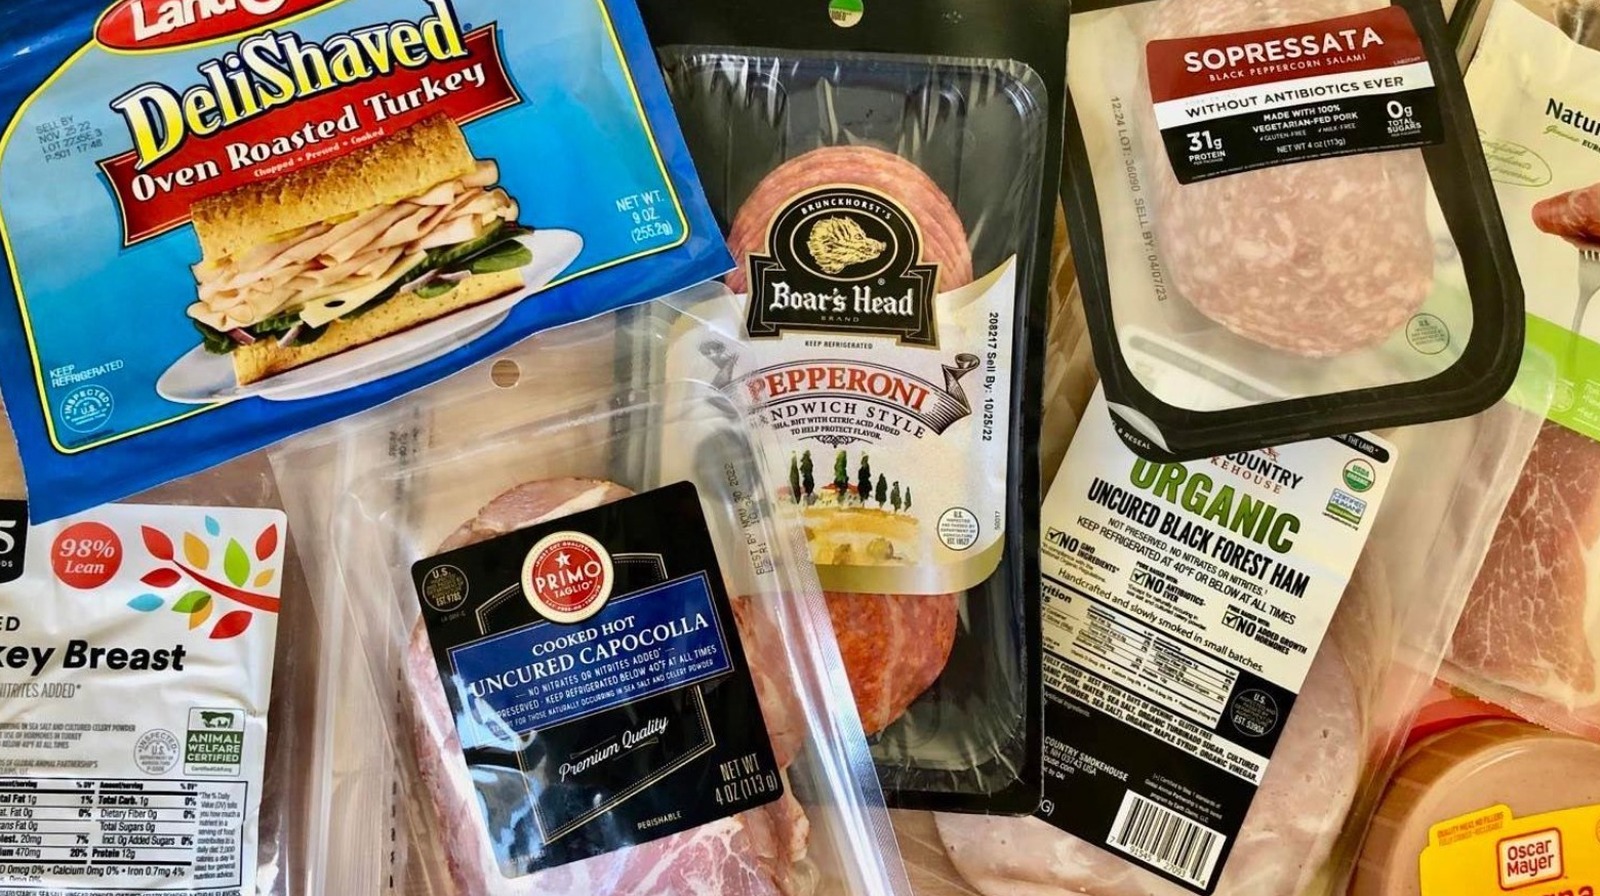 365 Whole Foods Market Turkey-Style Deli Slices Reviews